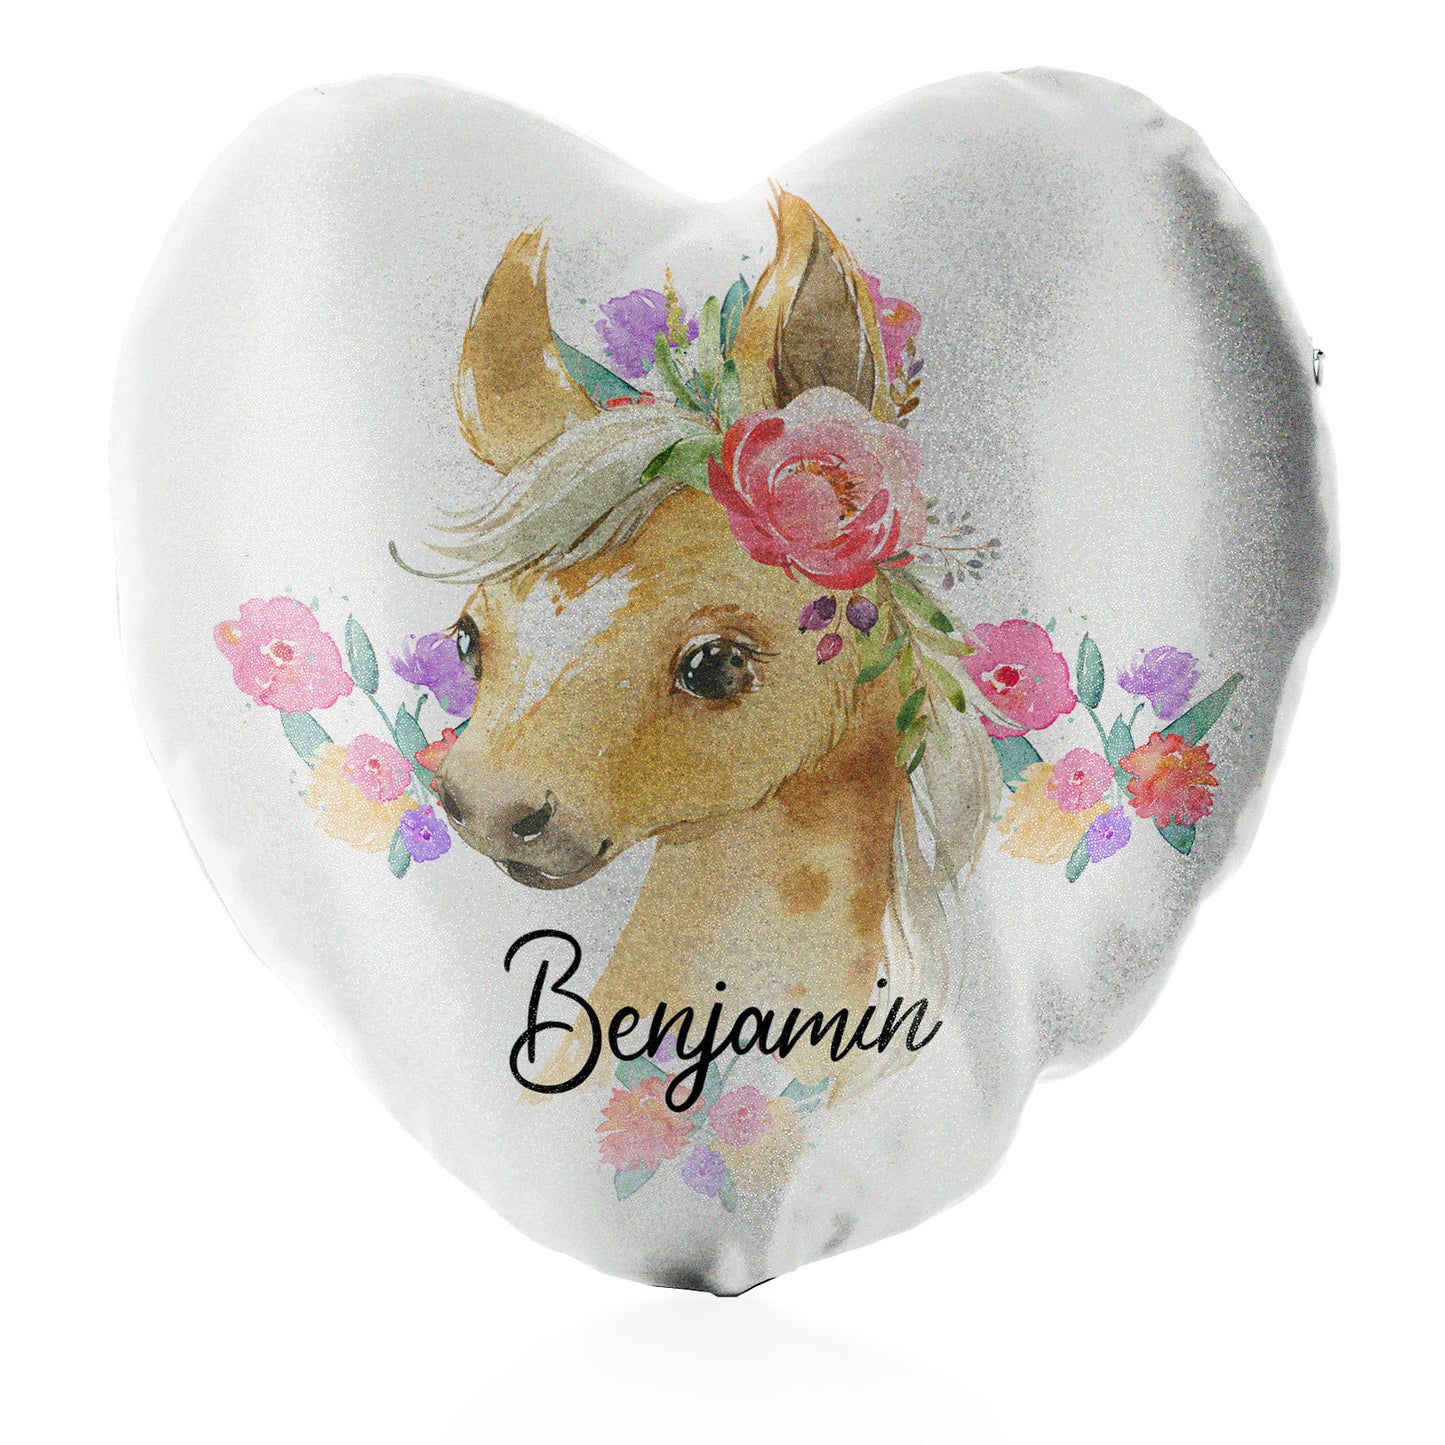 Personalised Glitter Heart Cushion with Palomino Horse Multicolour Flower Print and Cute Text